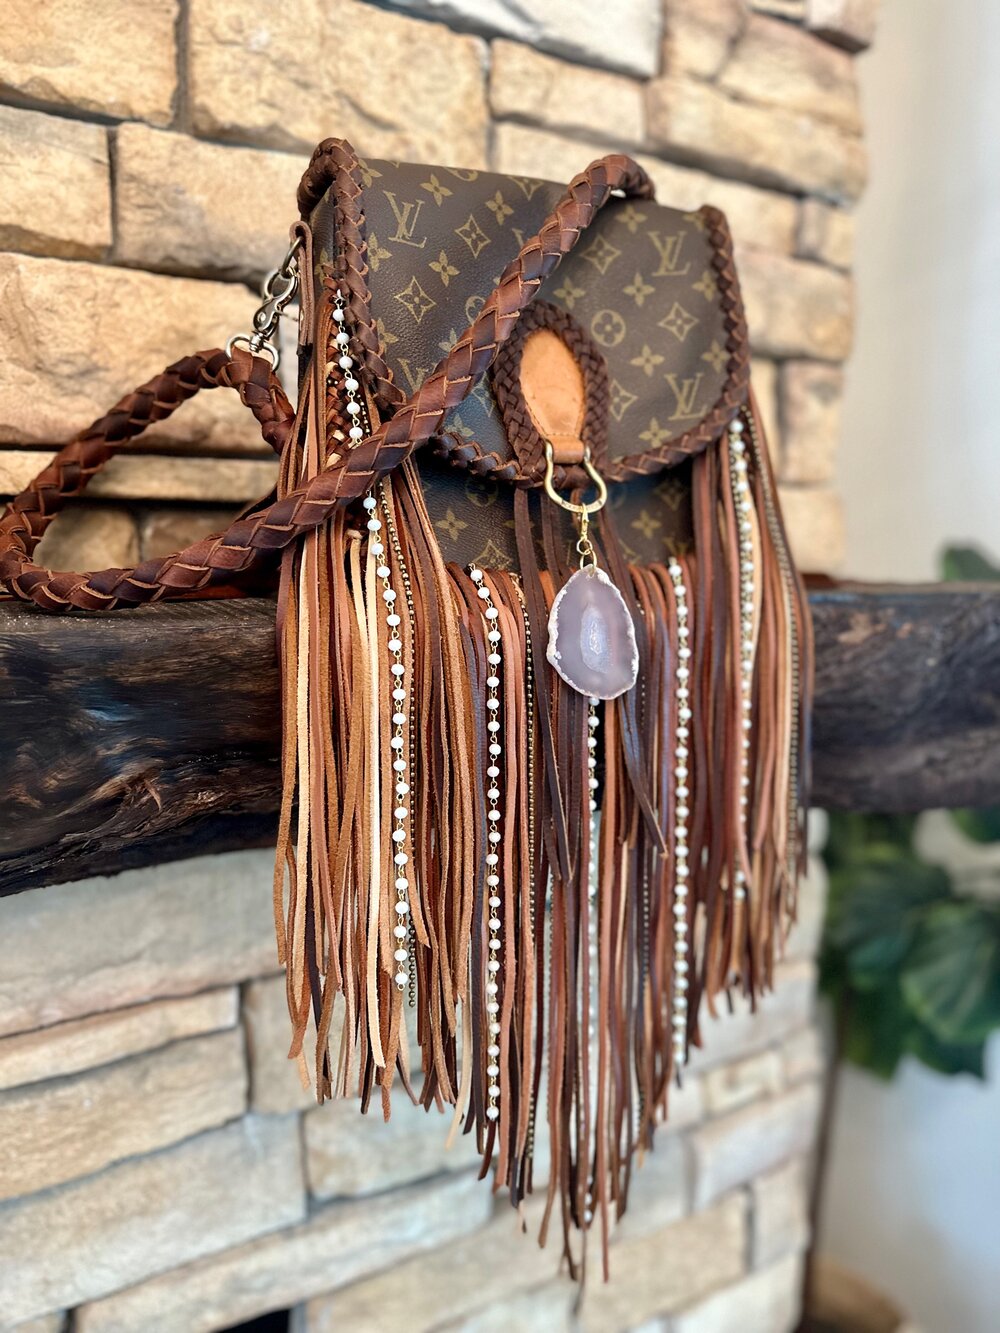 The Austin Bag large black and brown — Classic Boho Bags